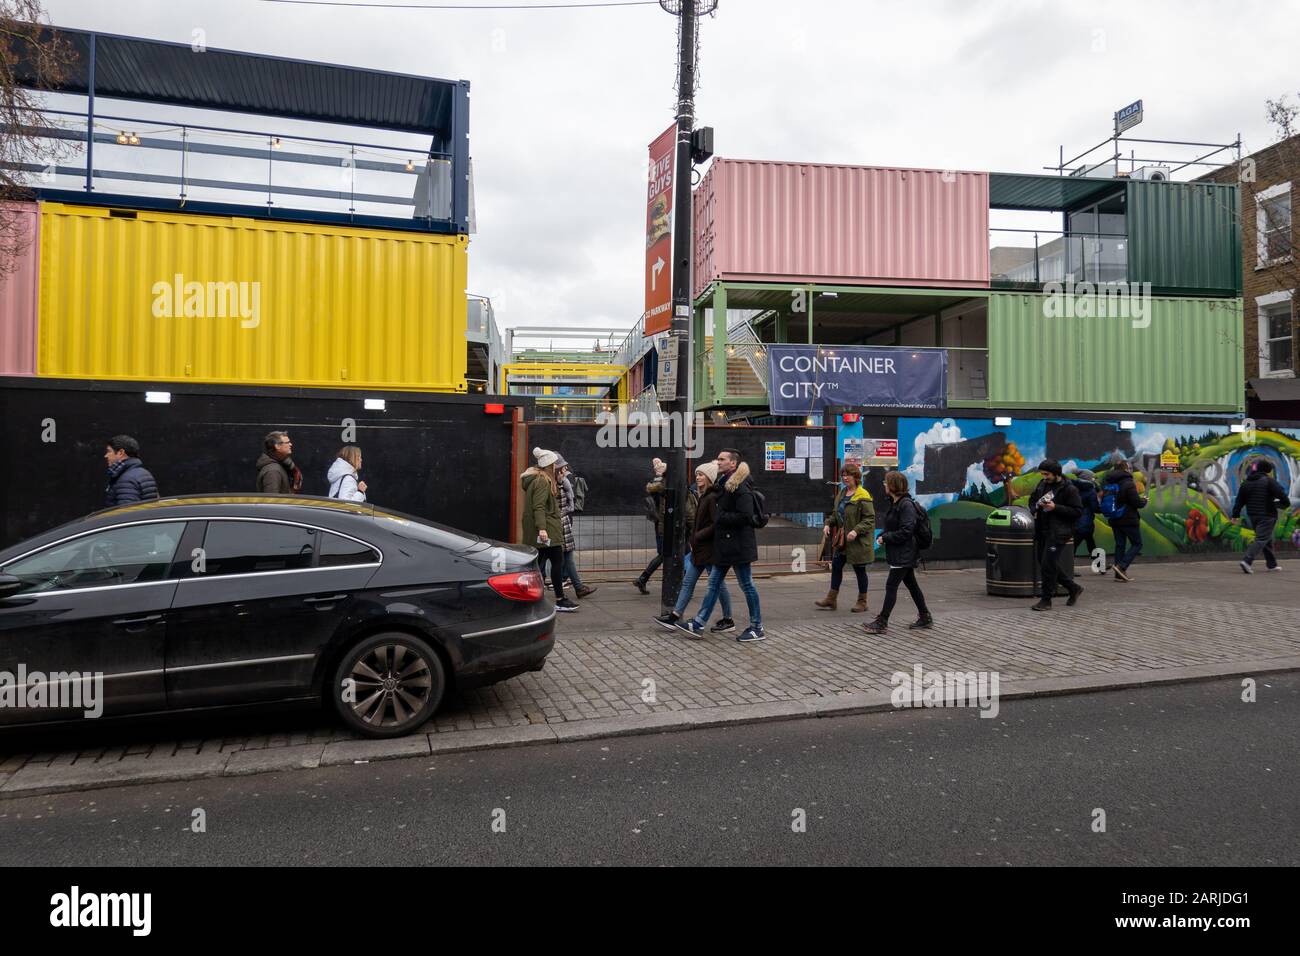 Container City under construction, Camden Town, London, UK Stock Photo